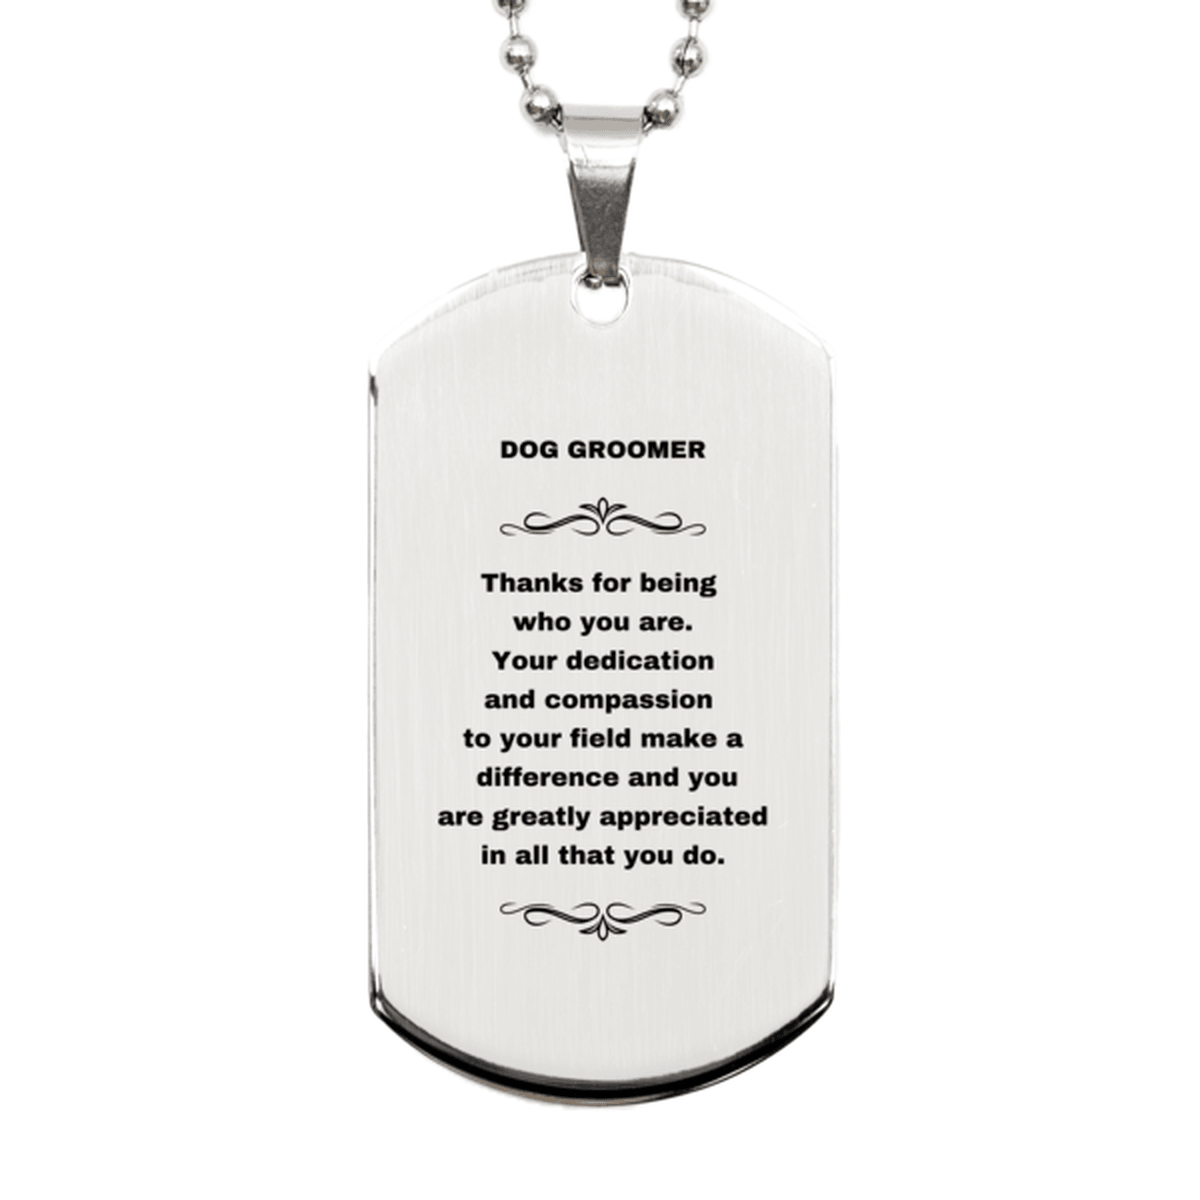 Dog Groomer Silver Engraved Dog Tag Necklace - Thanks for being who you are - Birthday Christmas Jewelry Gifts Coworkers Colleague Boss - Mallard Moon Gift Shop